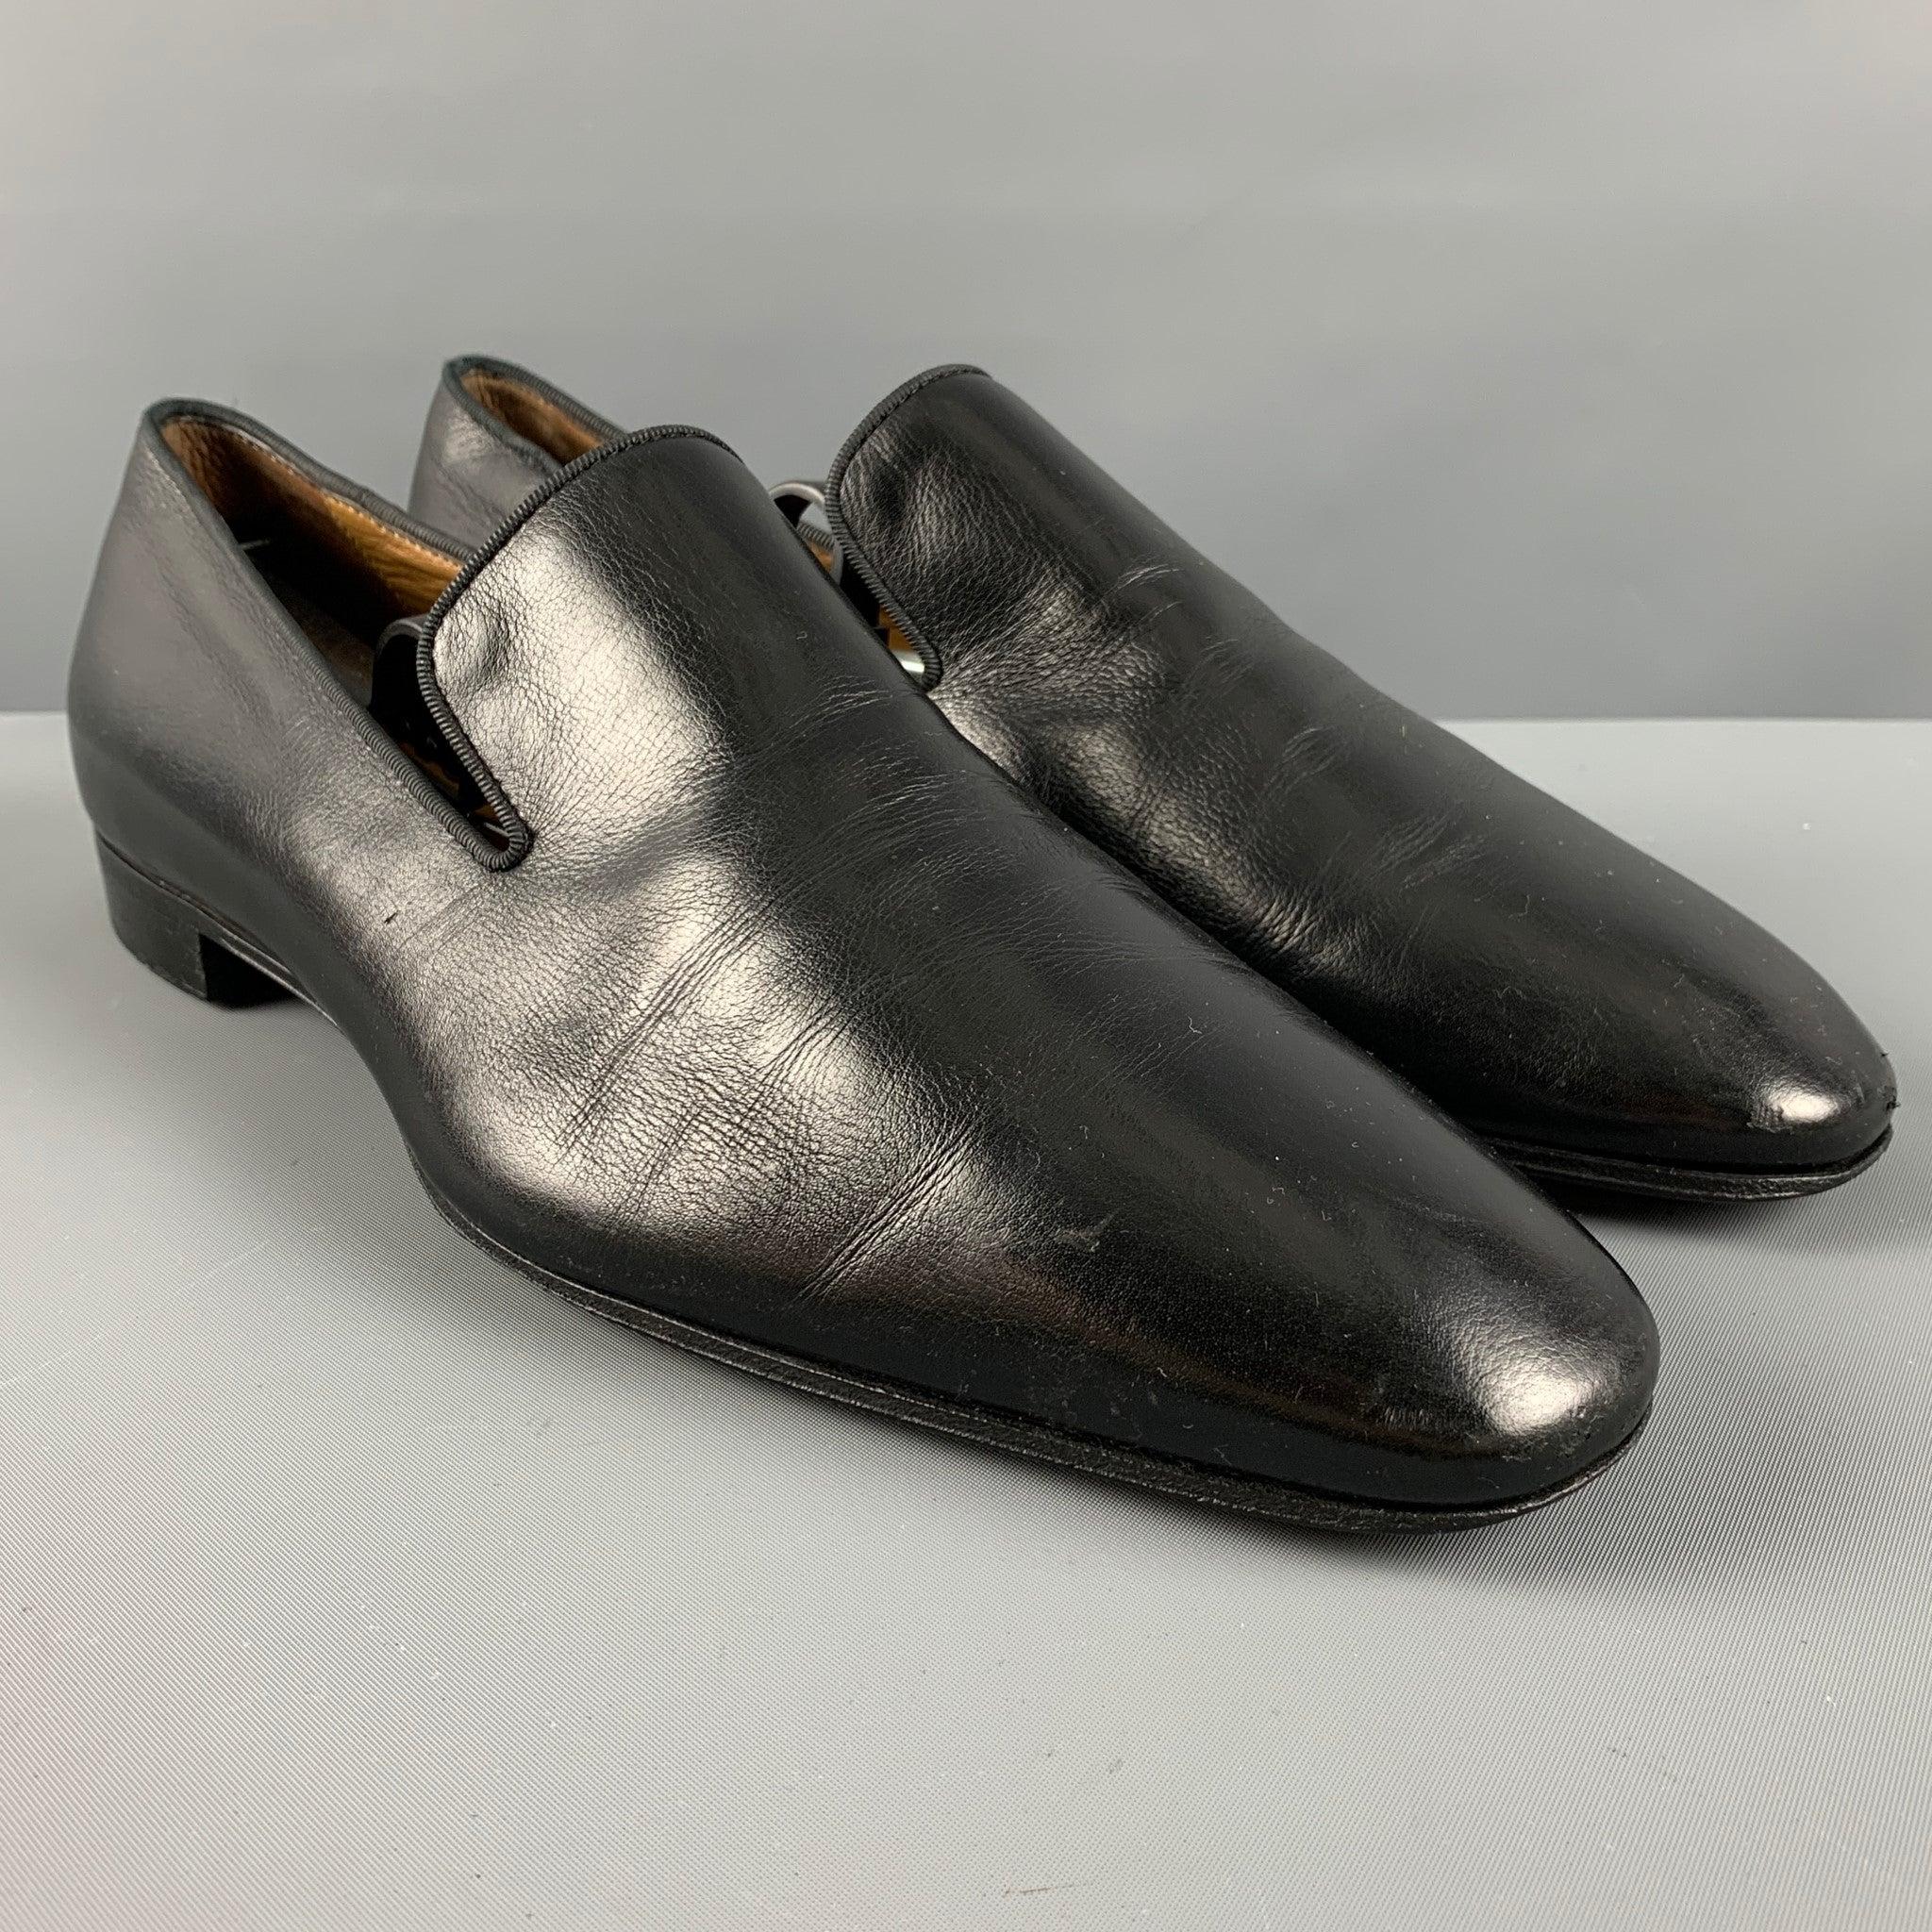 PAUL STUART Harrier loafers comes in a black leather material featuring a square toe and a slip on style. Comes with dust bag. Made in Italy. Excellent Pre-Owned Condition. 

Marked:   9 1/2 17Outsole: 12.5 inches  x 4 inches  
  
  
 
Reference: